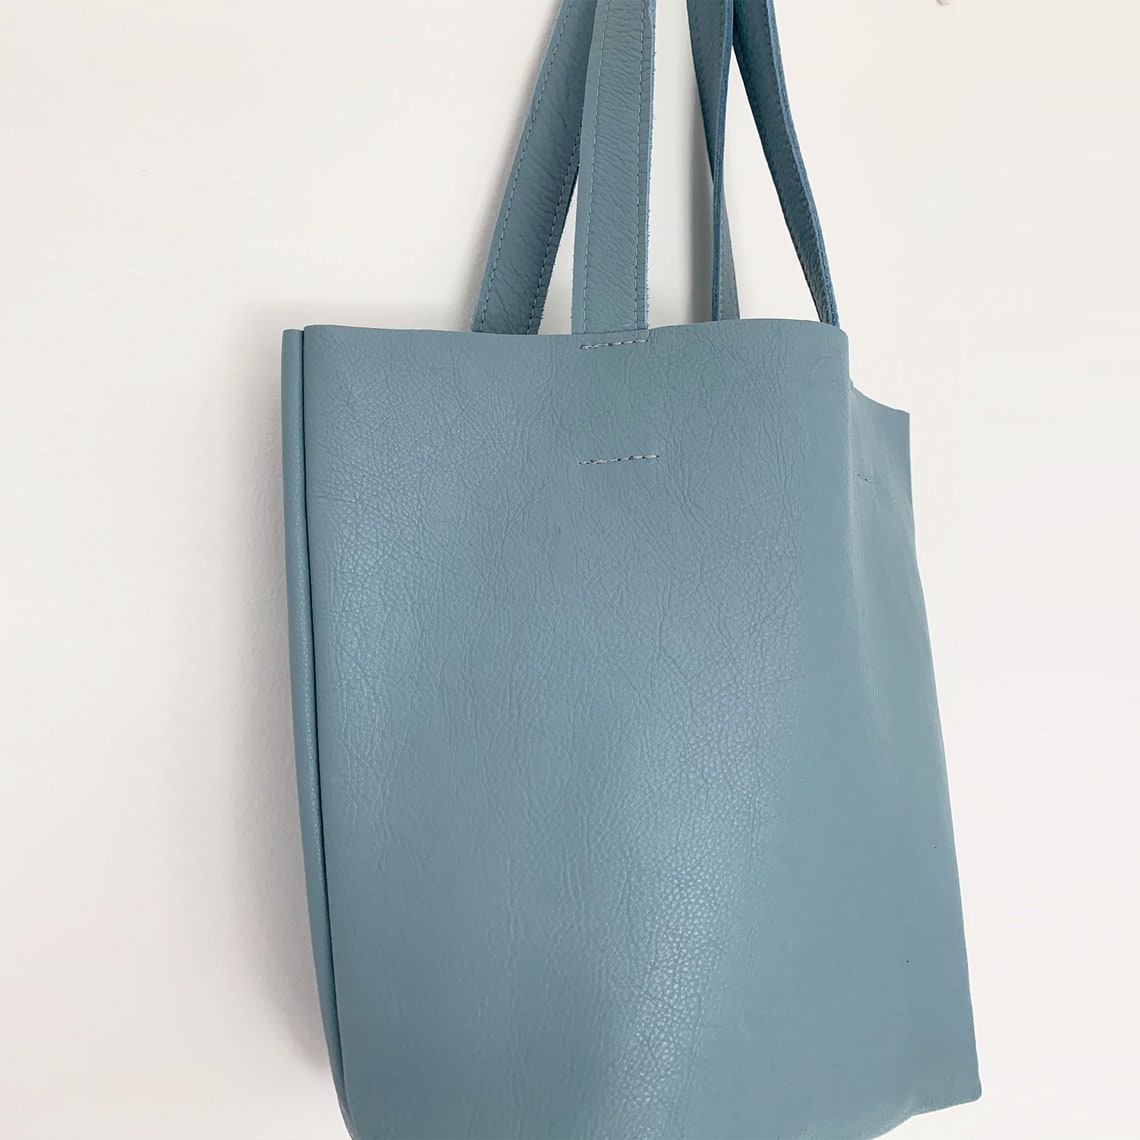 Blue Leather Tote Bag | Etsy